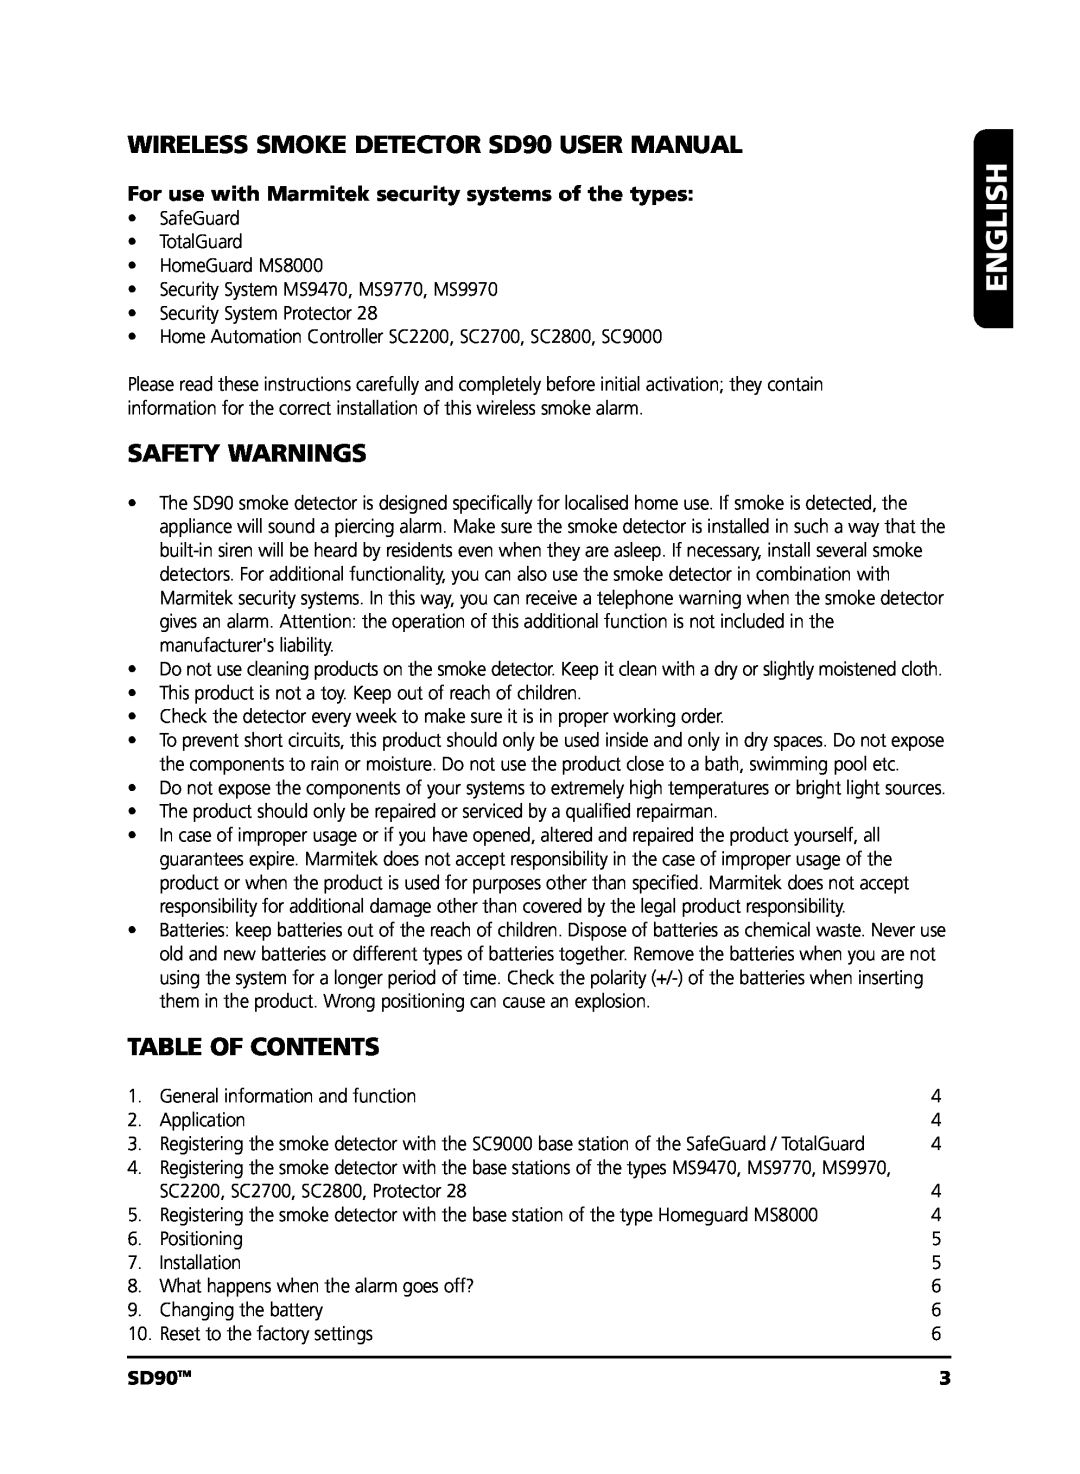 Marmitek user manual English, Safety Warnings, Table Of Contents, SD90TM 